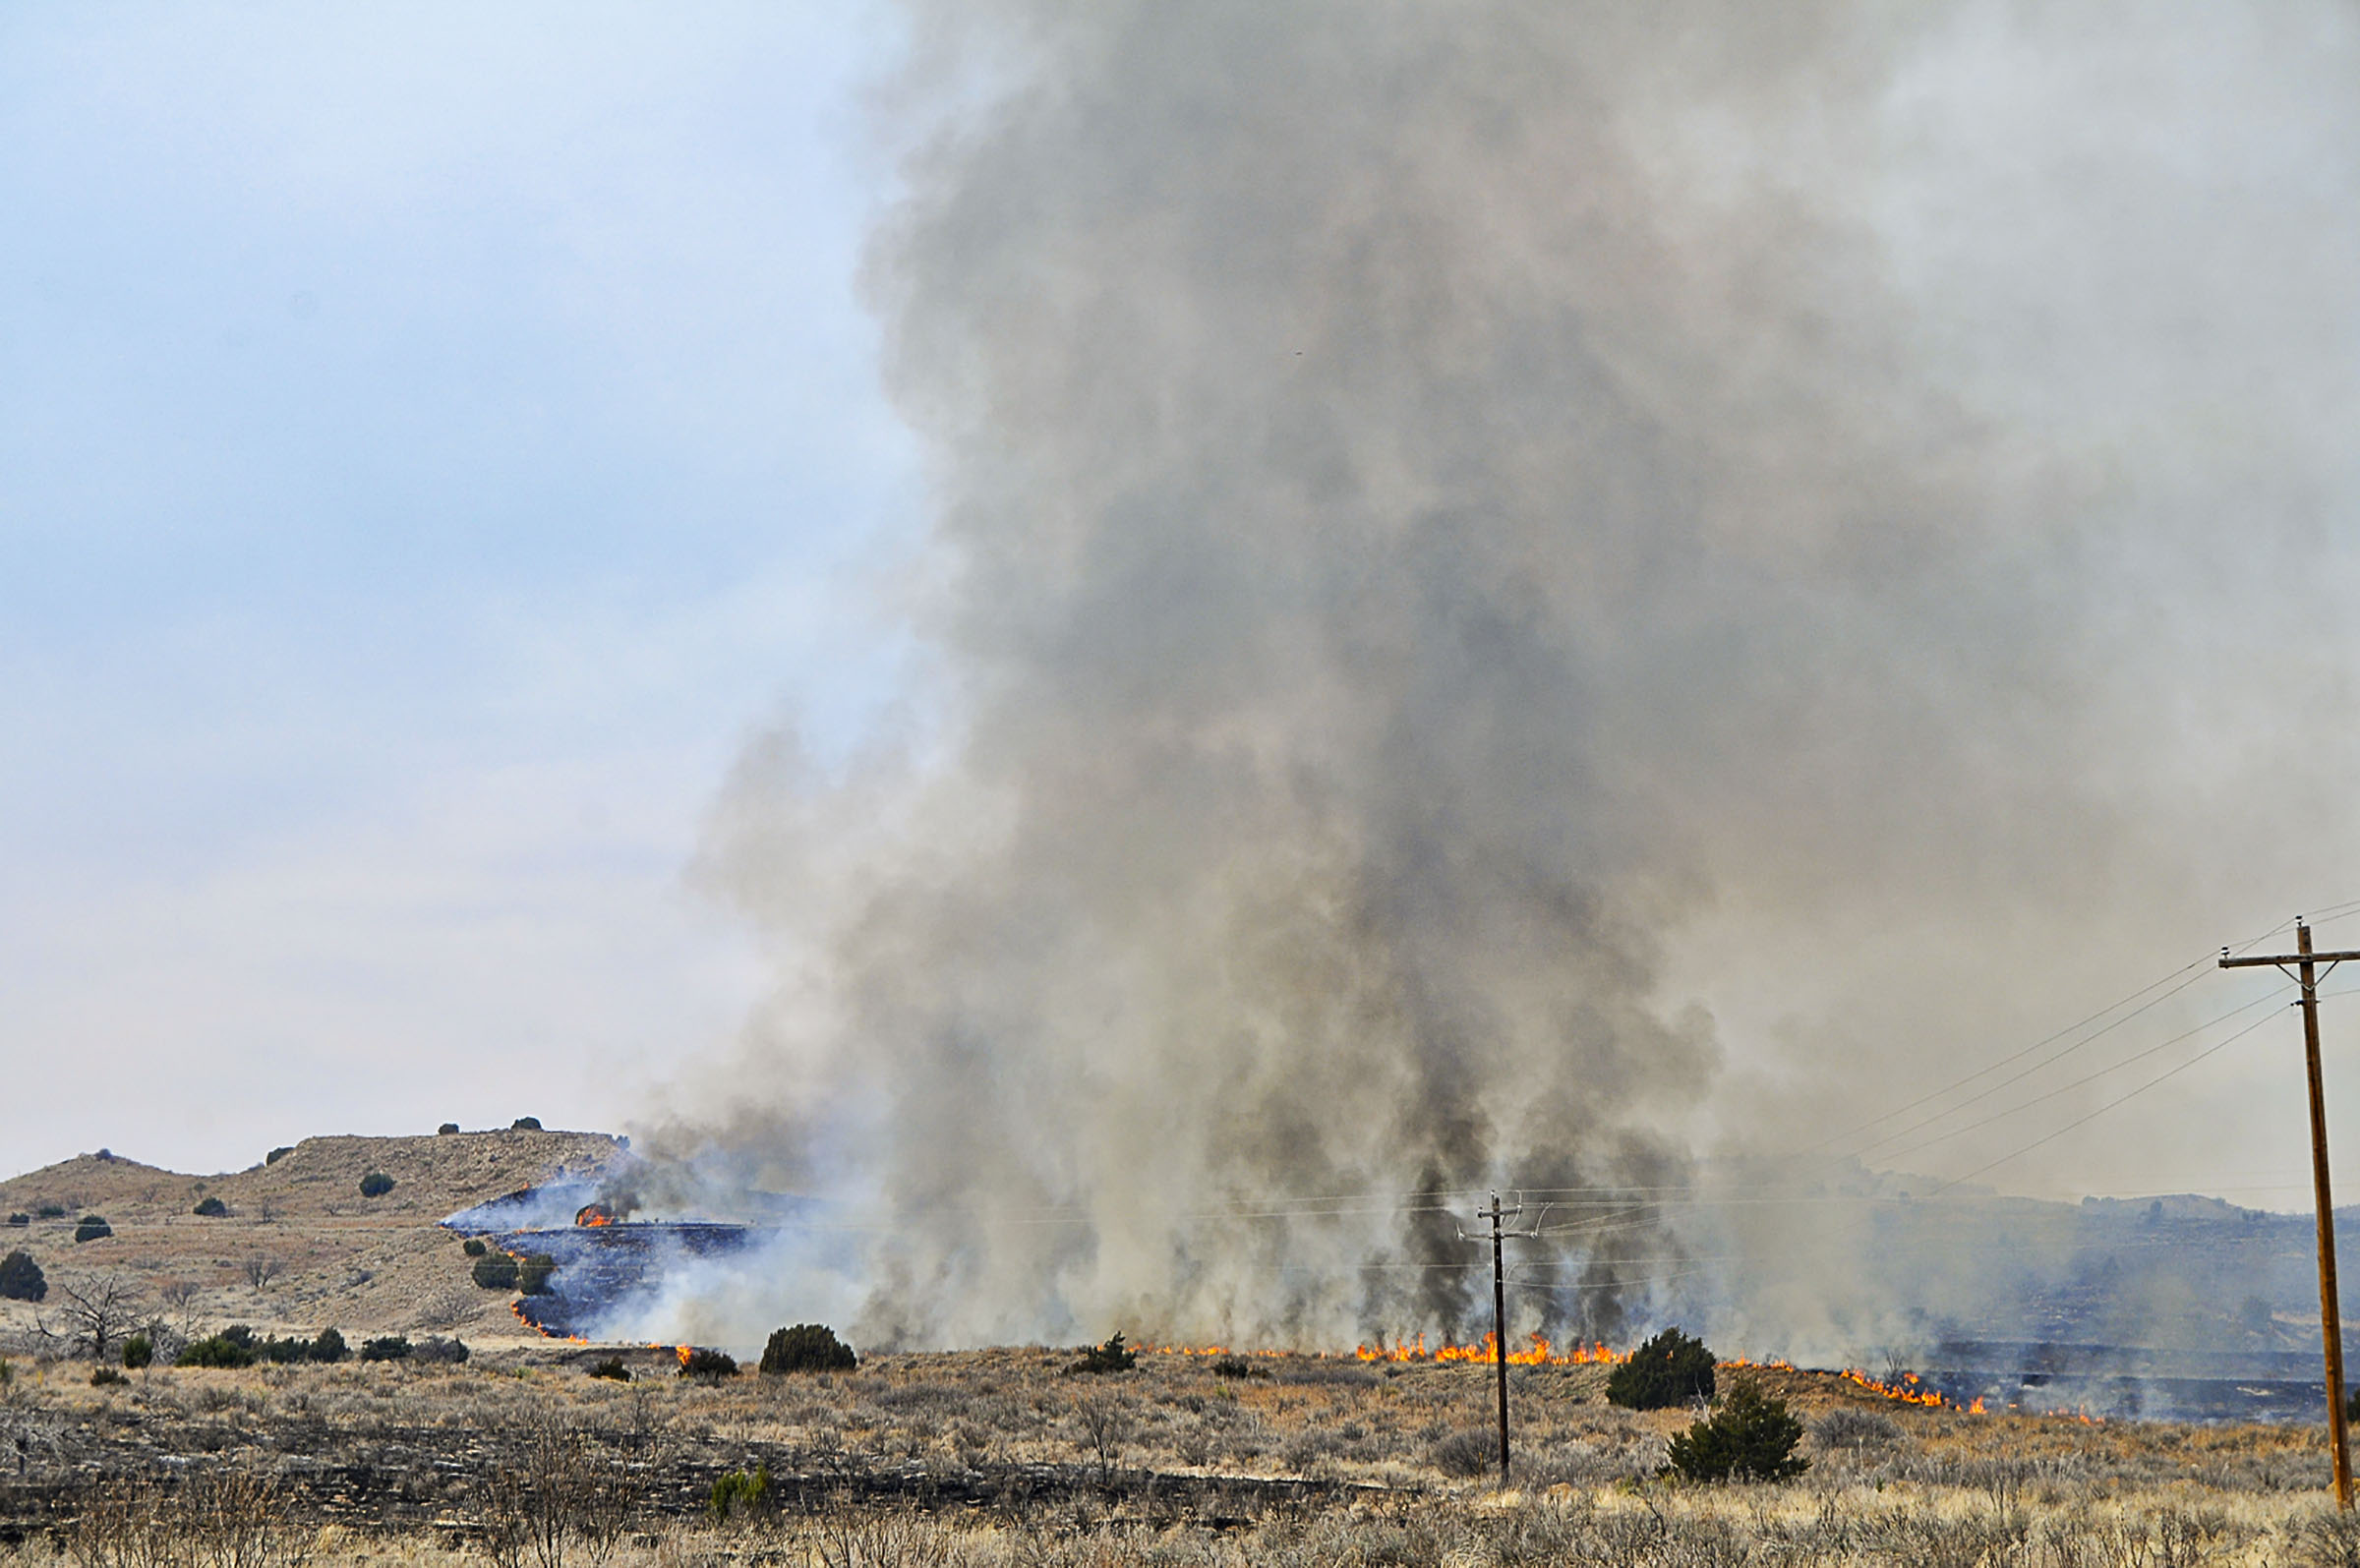 A large line of gray smoke rises from a fire along a grassy pasture